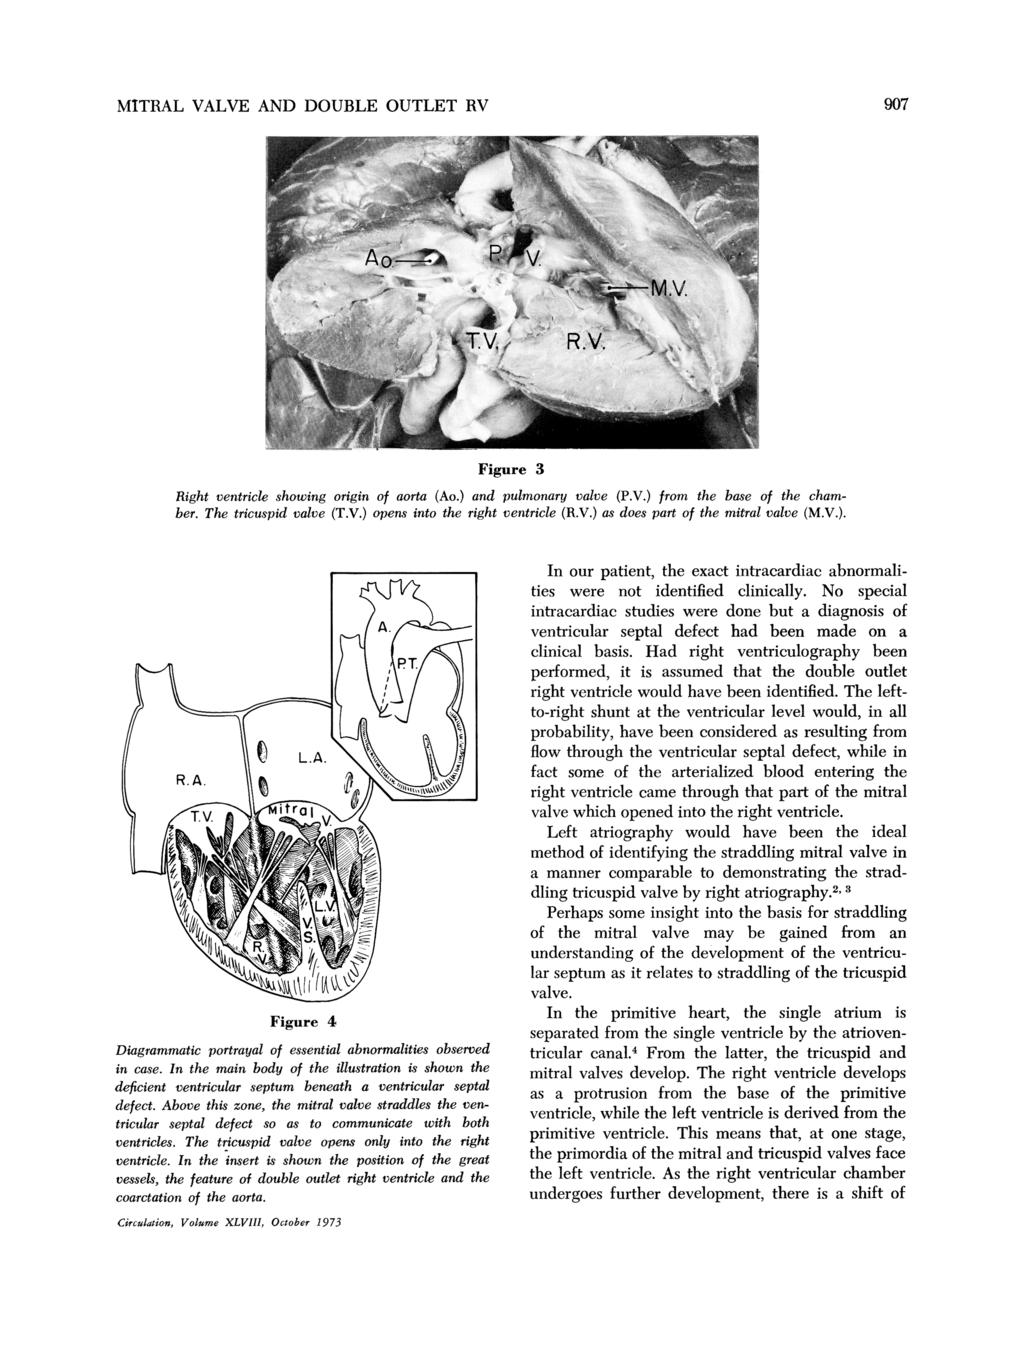 907 MITRAL VALVE AND DOUBLE OUTLET RV _v r~~-d~ Figure 3 Right ventricle showing origin of aorta (Ao.) and pulmonary valve (P.V.) from the base of the chamber. The tricuspid valve (T.V.) opens into the right ventricle (R.